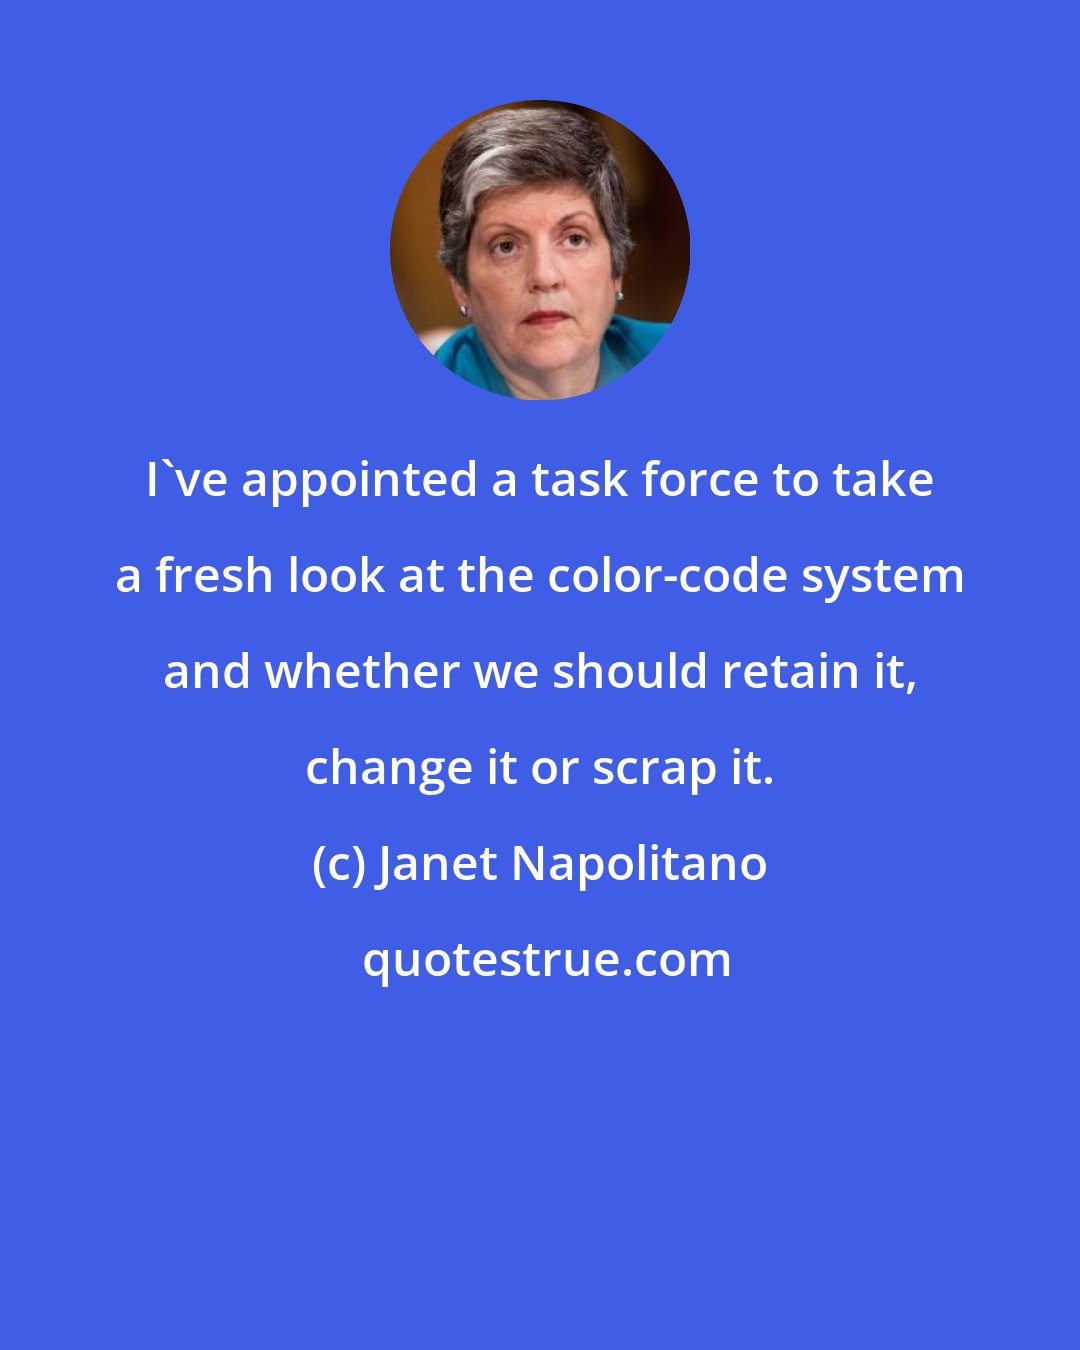 Janet Napolitano: I've appointed a task force to take a fresh look at the color-code system and whether we should retain it, change it or scrap it.